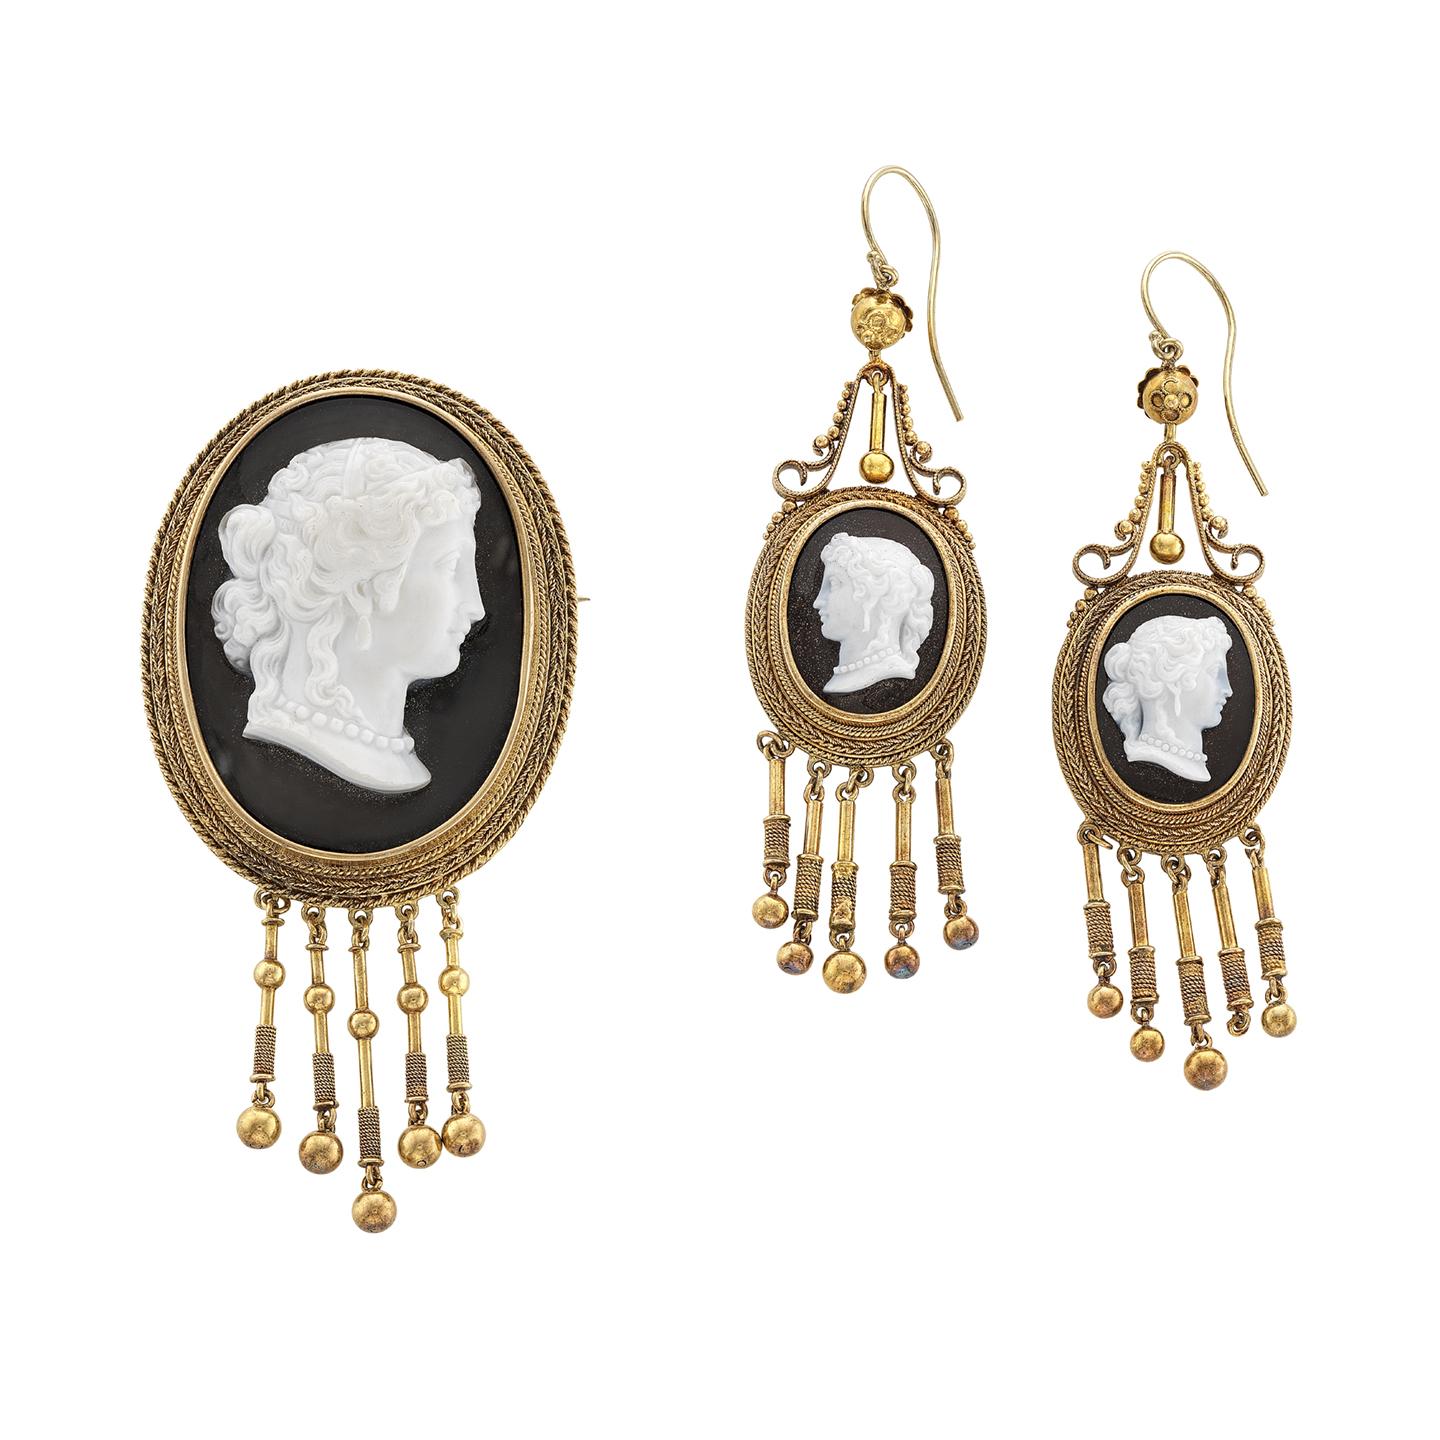 Estate Collection Victorian Stone Cameo Brooch and Earring Set